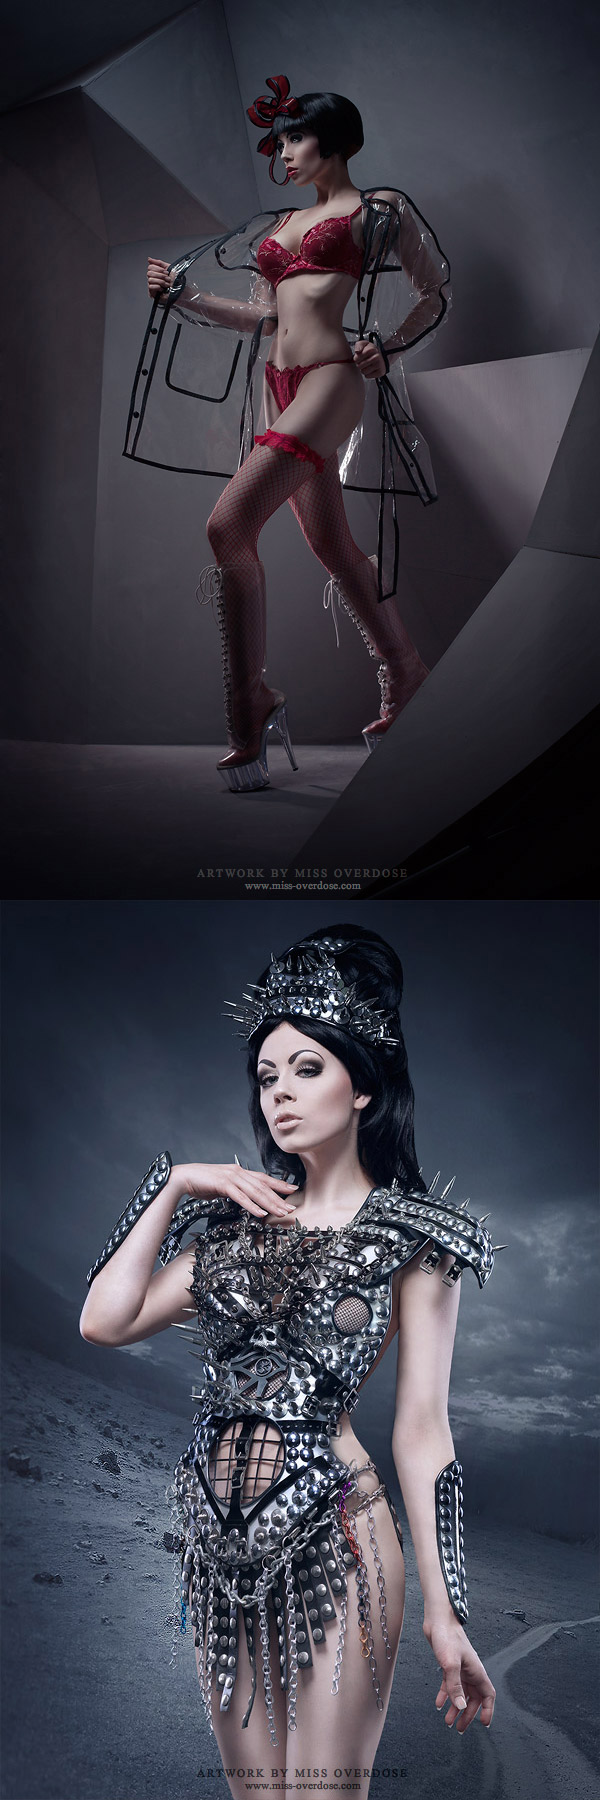 Female model photo shoot of Model Ophelia Overdose by Moritz Maibaum and Julian M Kilsby, makeup by Miss Overdose 